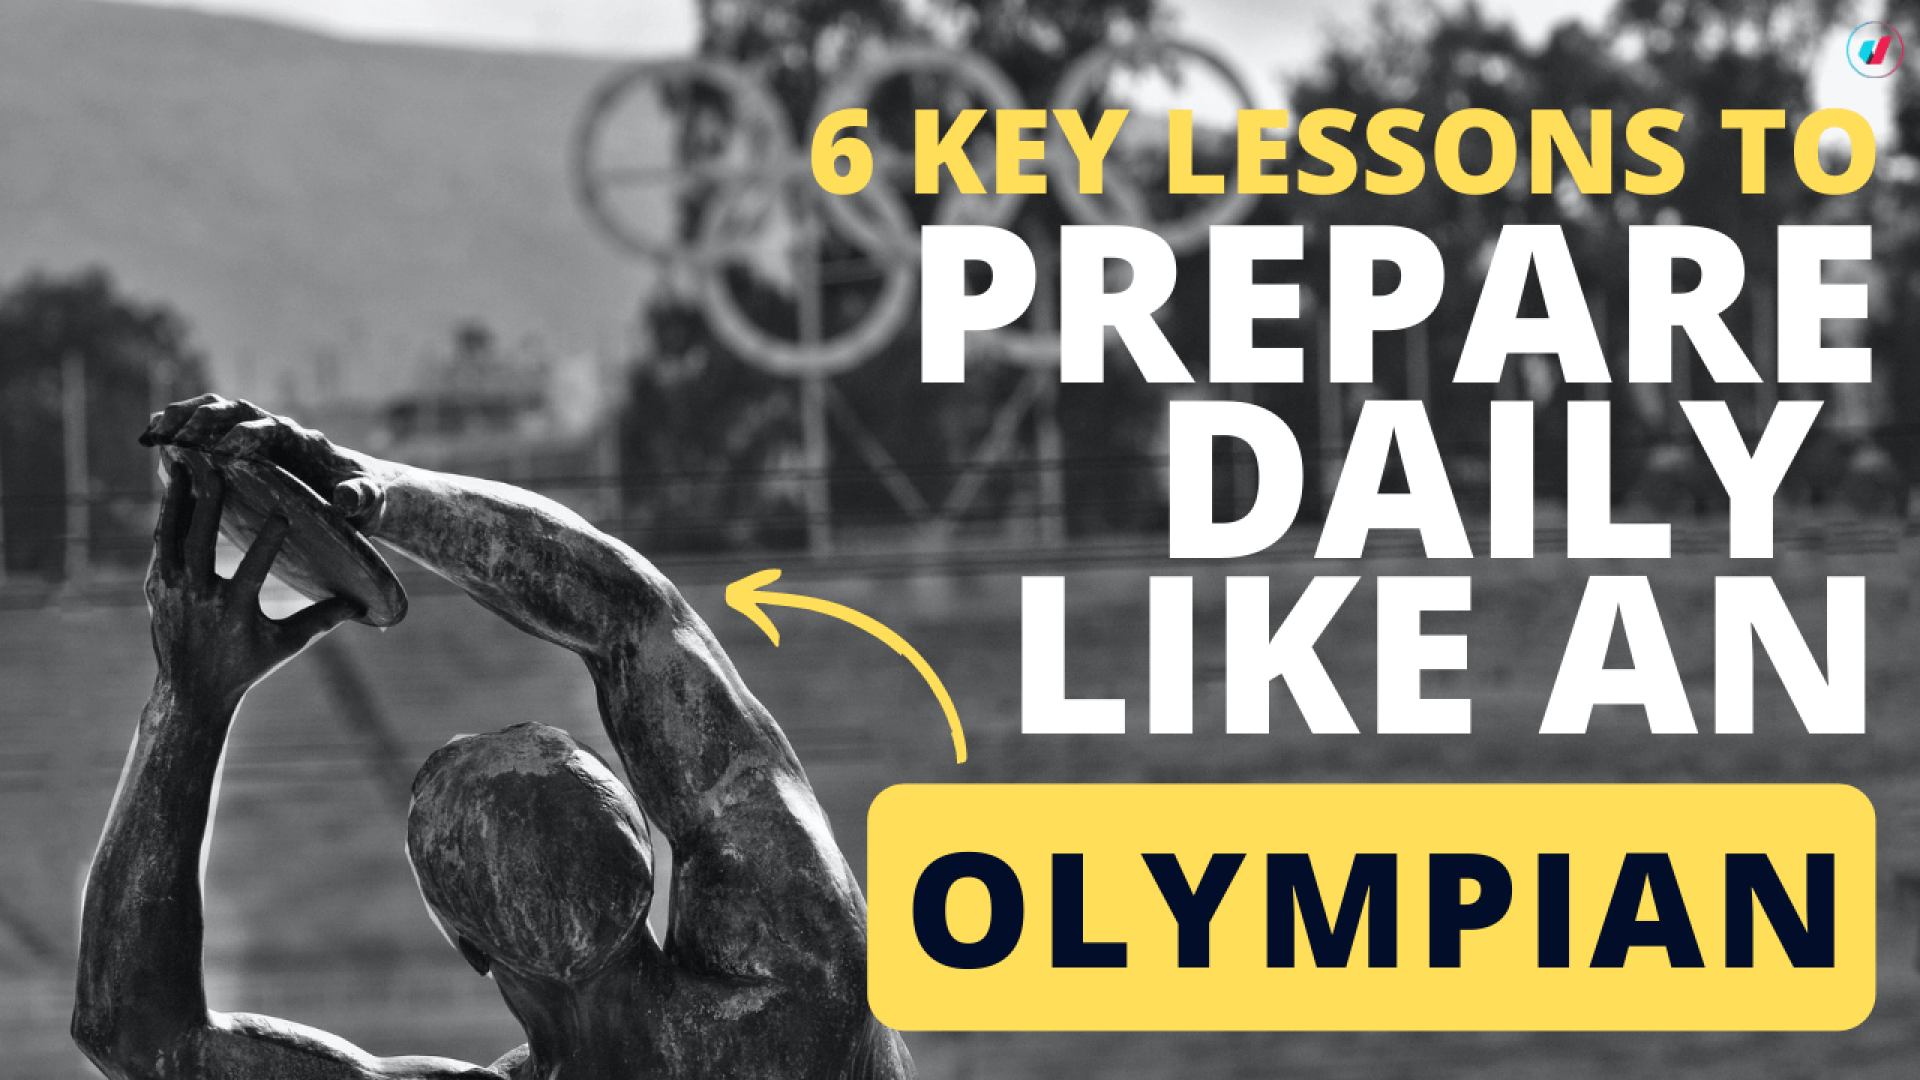 6 Key Lessons To Prepare Daily Like An Olympian